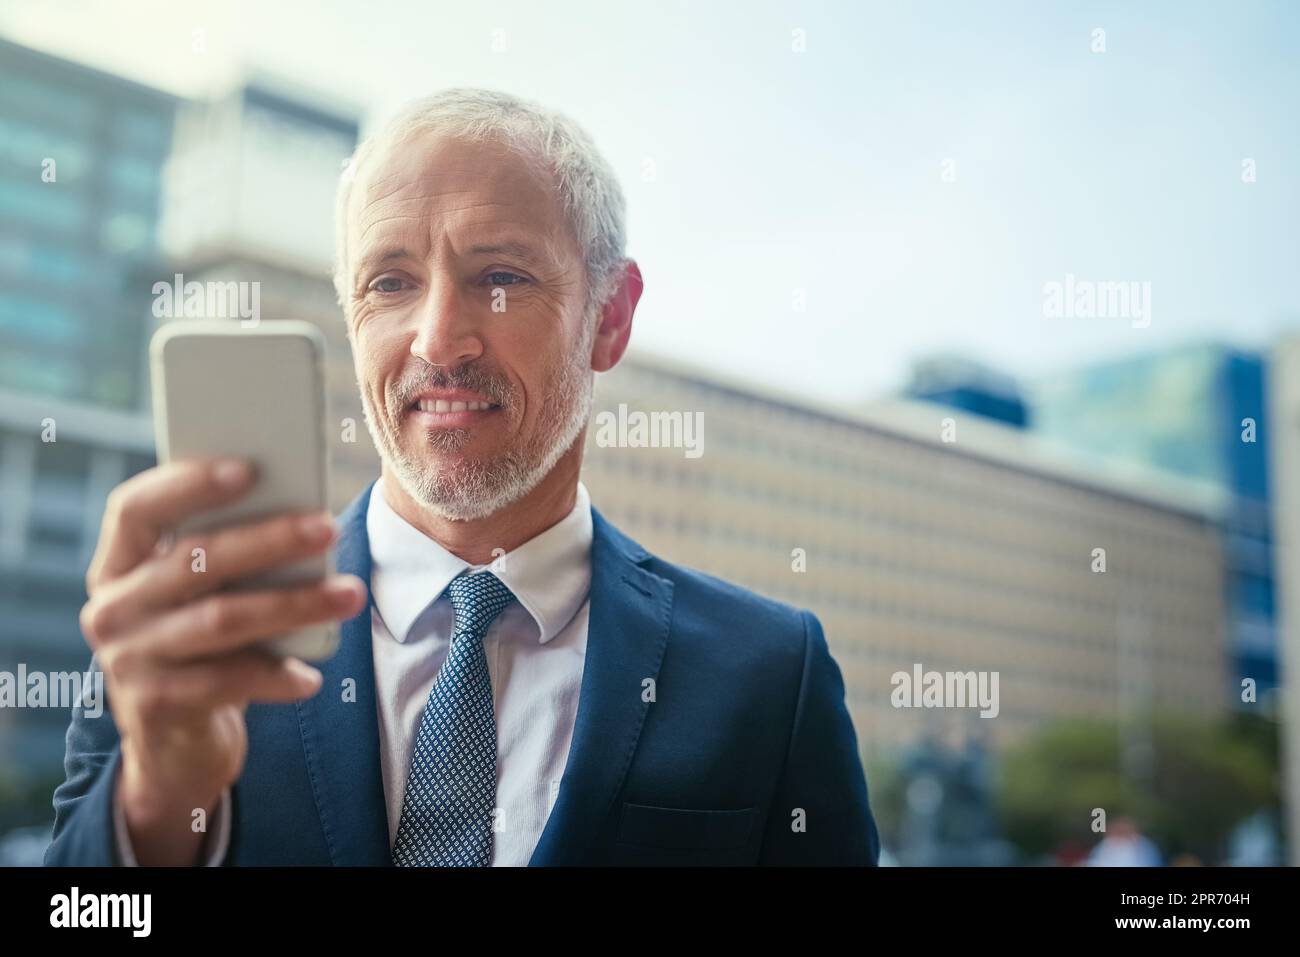 Letting his fingers do the talking. Shot of a confident businessman using his cellphone while standing outside his office building. Stock Photo